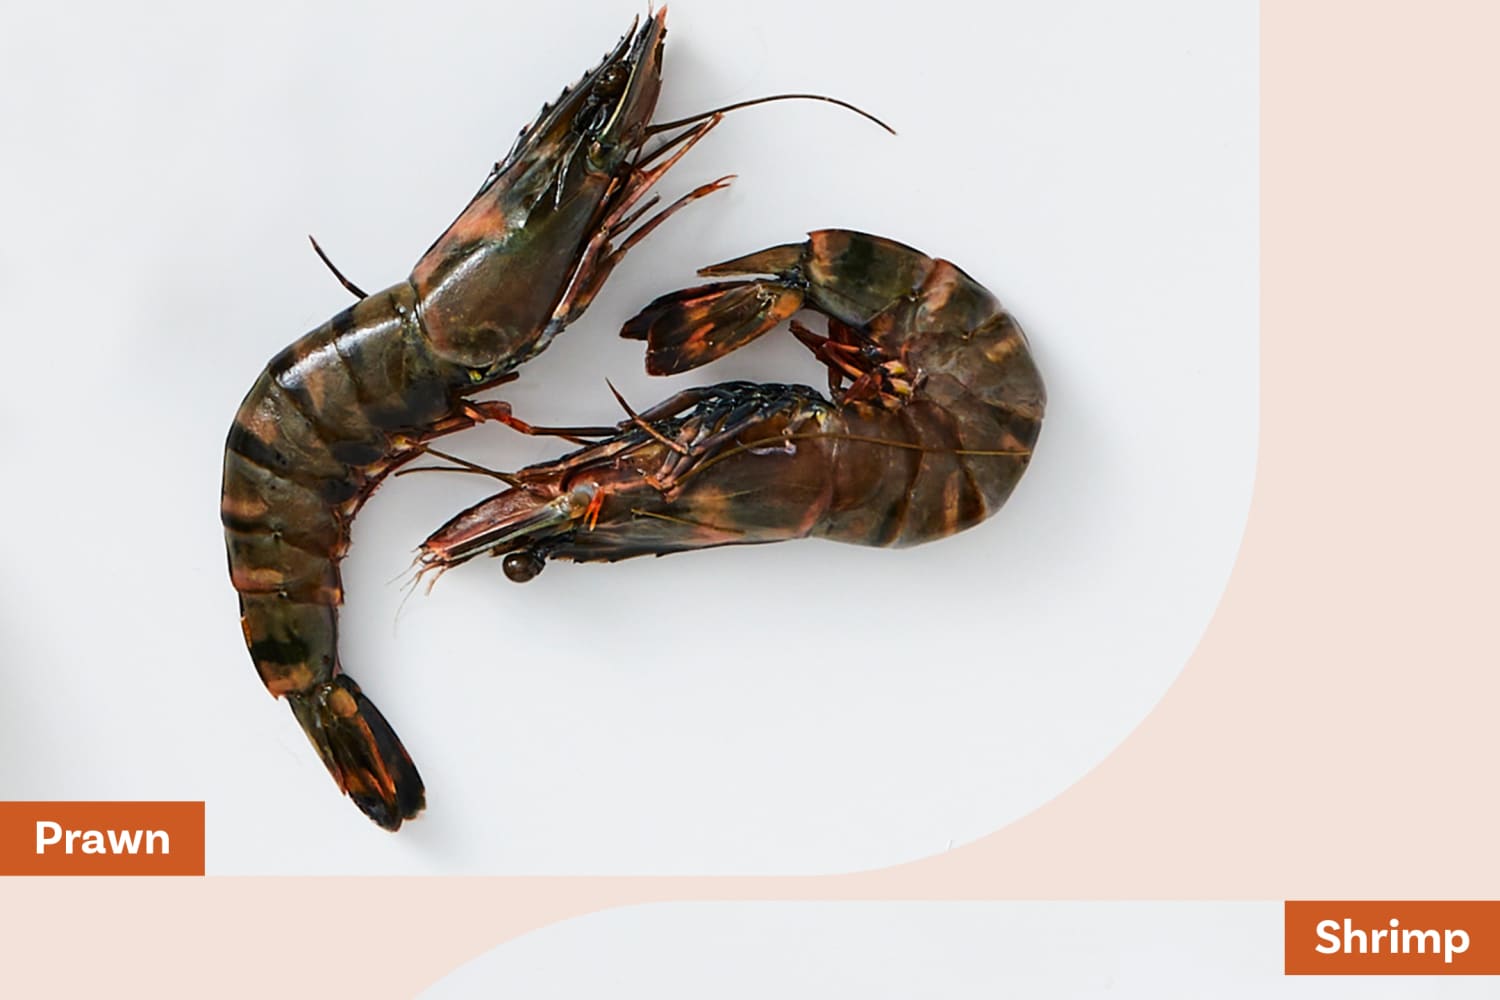 Shrimp vs Prawns: What's the Difference Between Prawn and Shrimp?